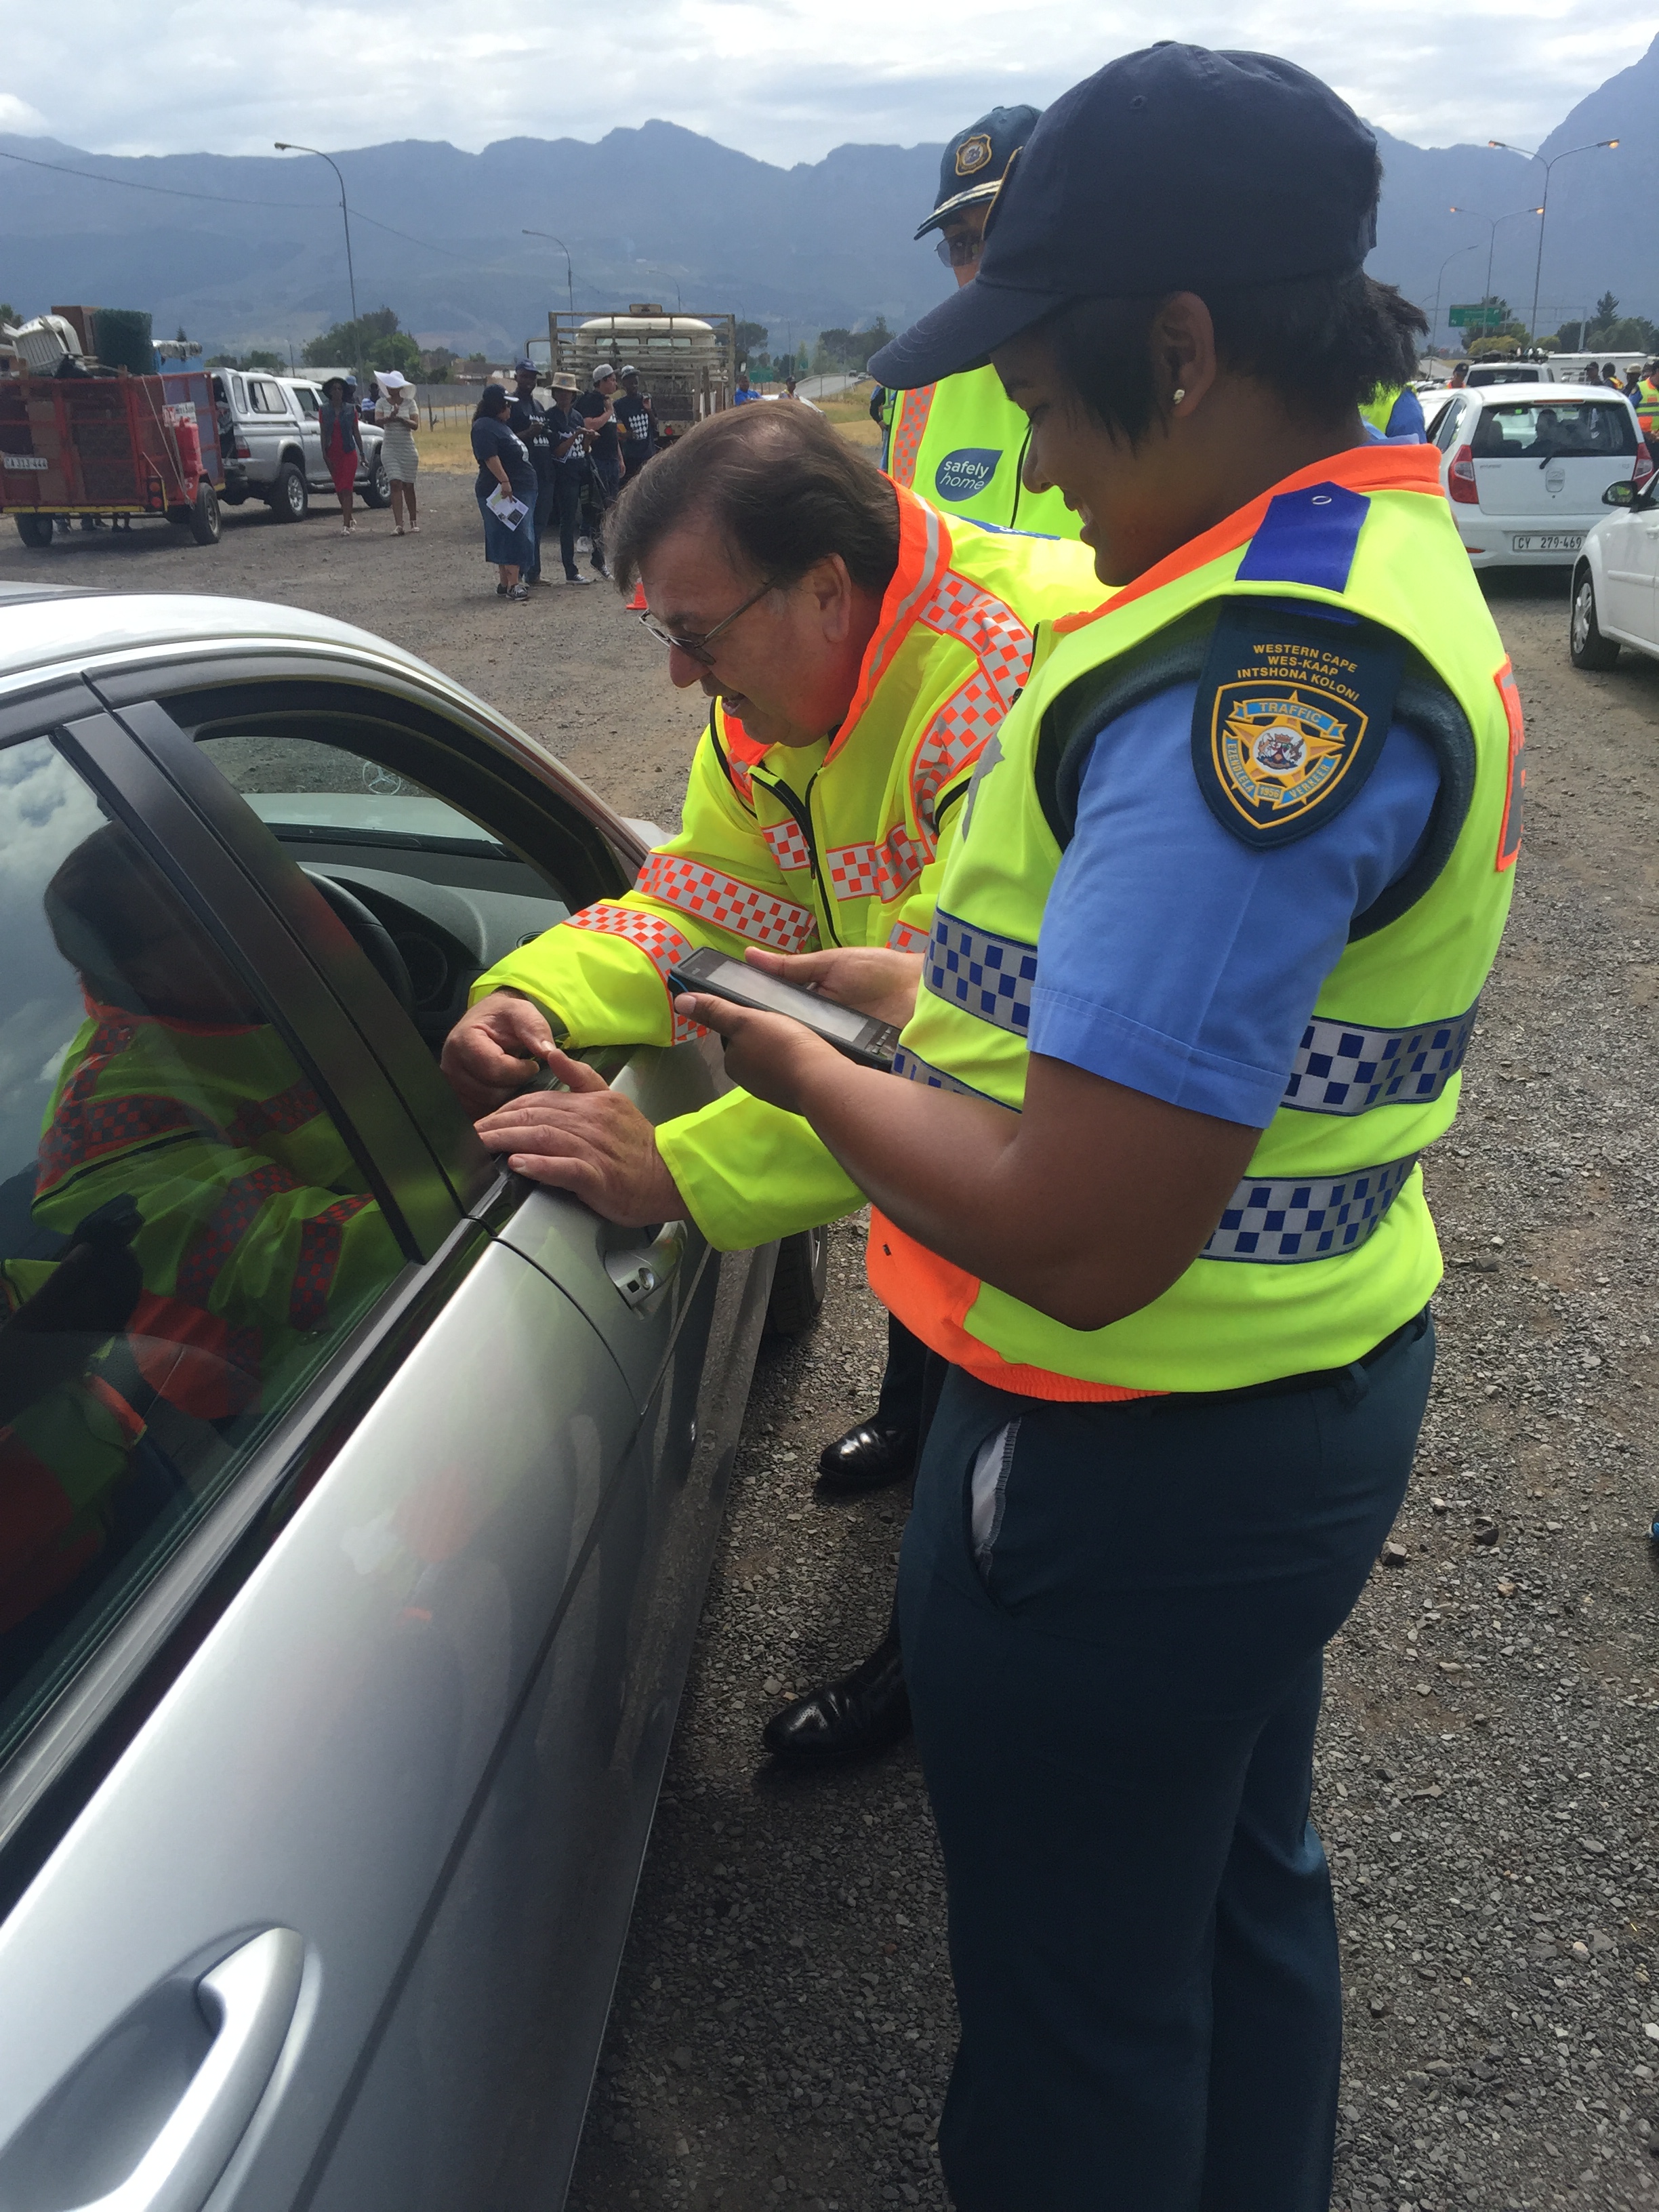 Minister Grant interacts with motorists at the roadblock ahead of the launch.